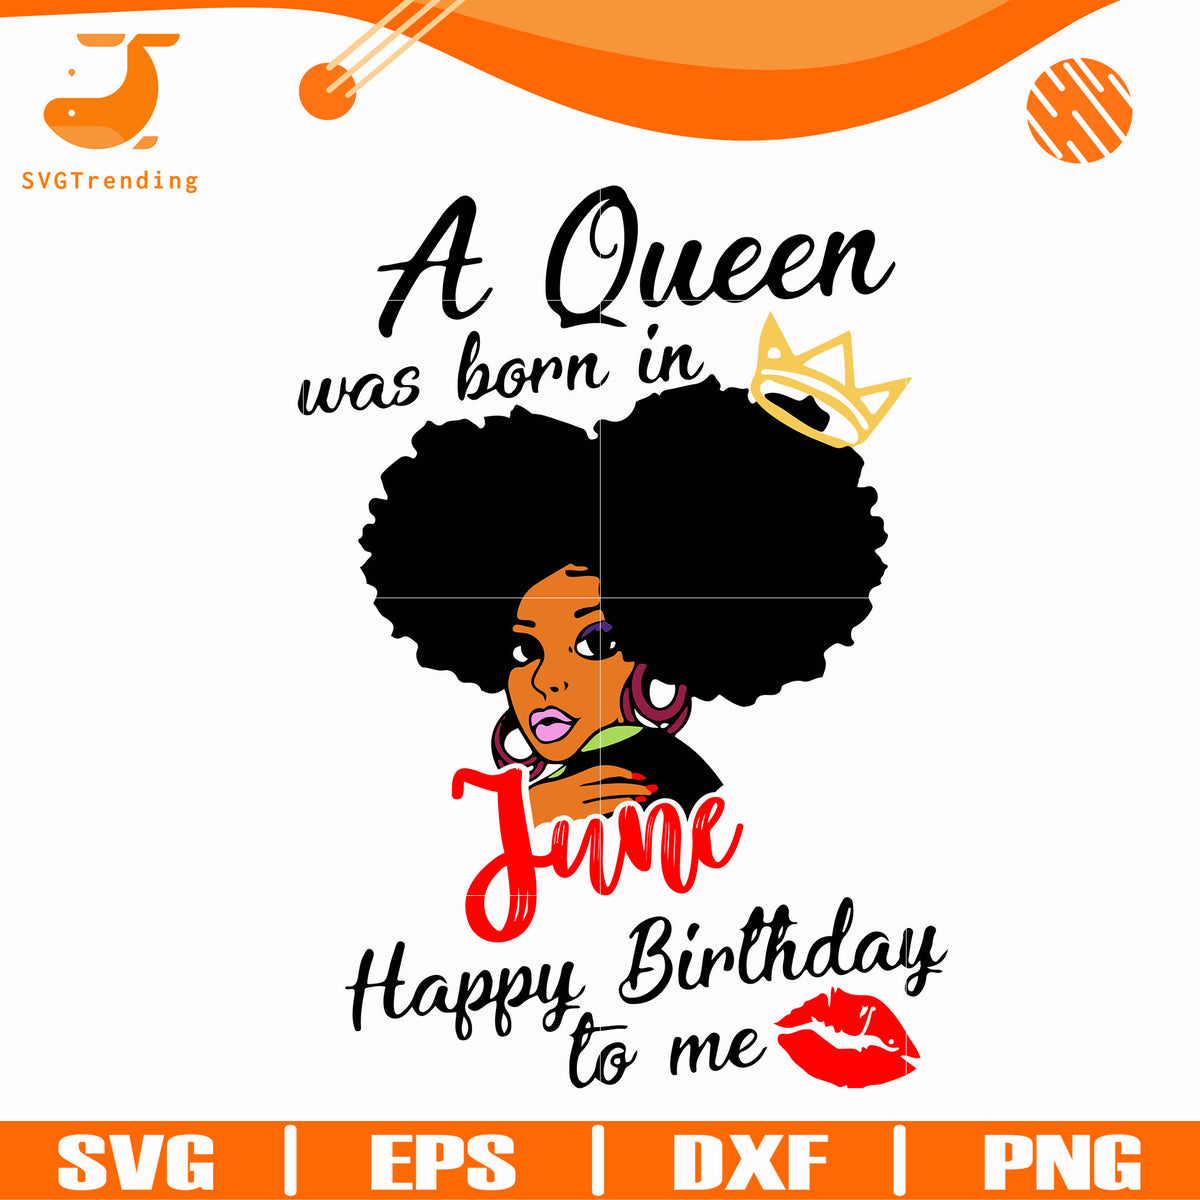 Download A queen was born in June happy birthday to me svg, png, dxf, eps digit - SVGTrending